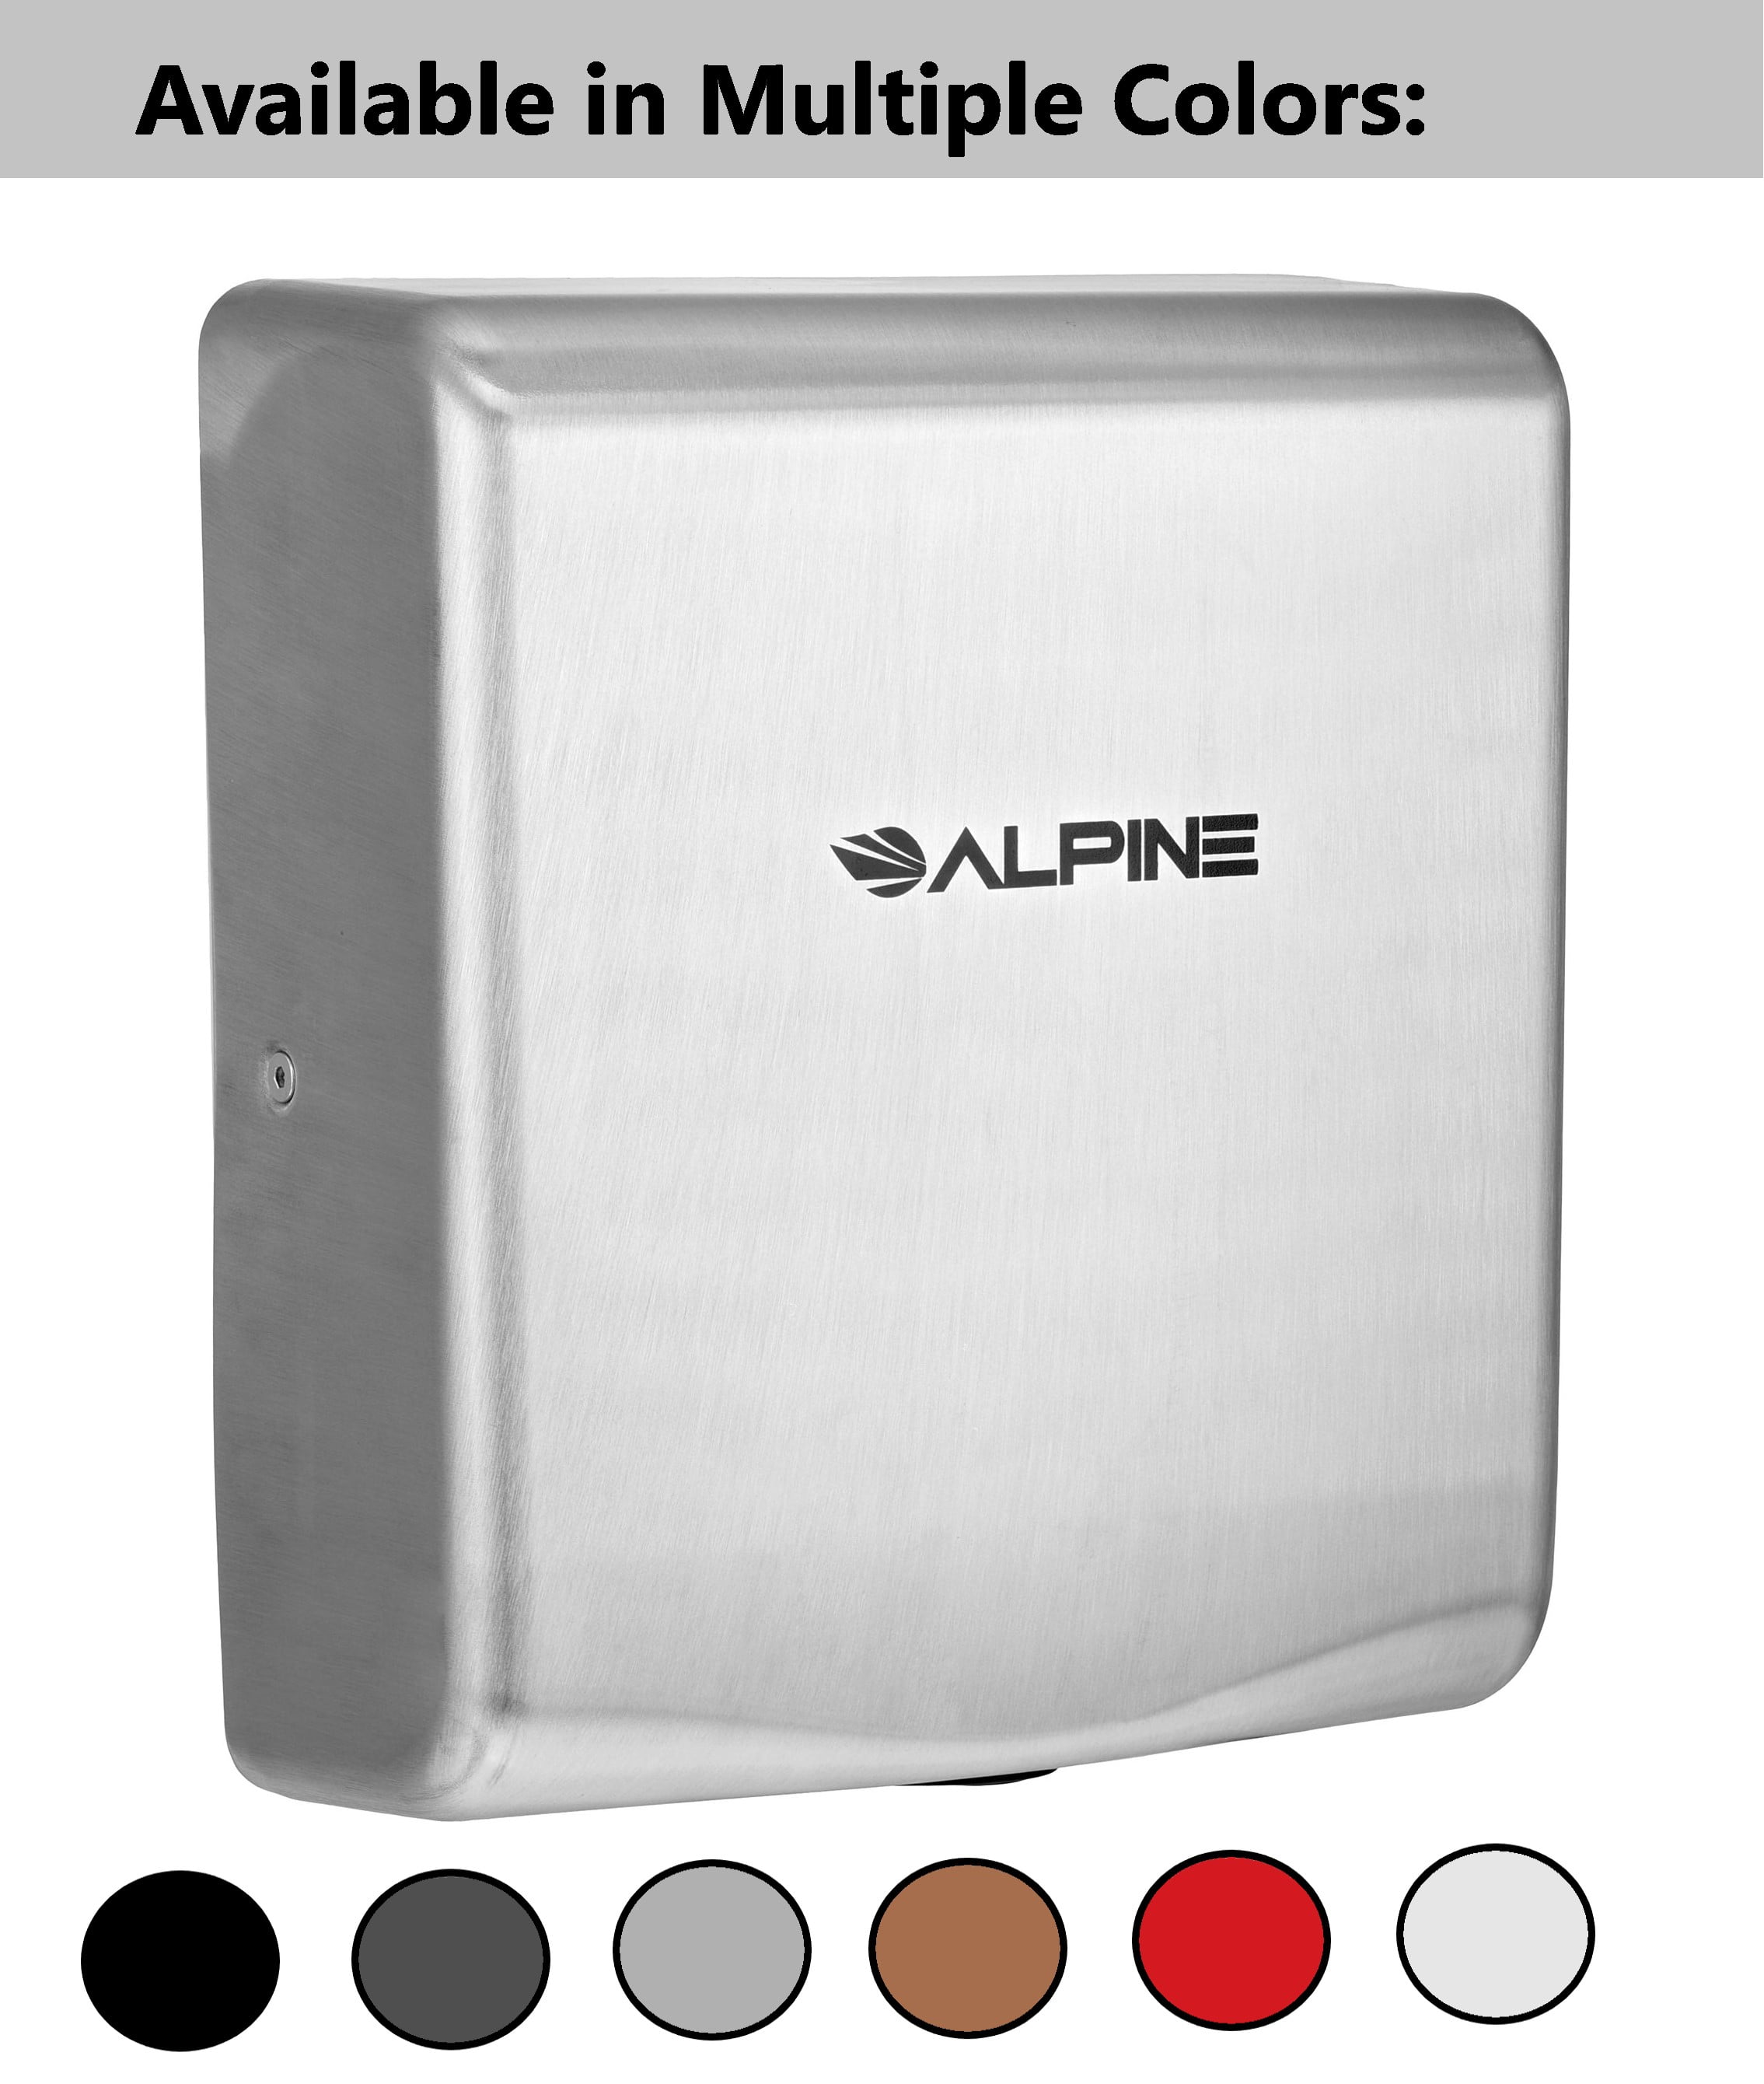 Alpine Willow Commercial Hand Dryer, Automatic, High Speed, Electric,  Brushed Stainless Steel Finish - Walmart.com